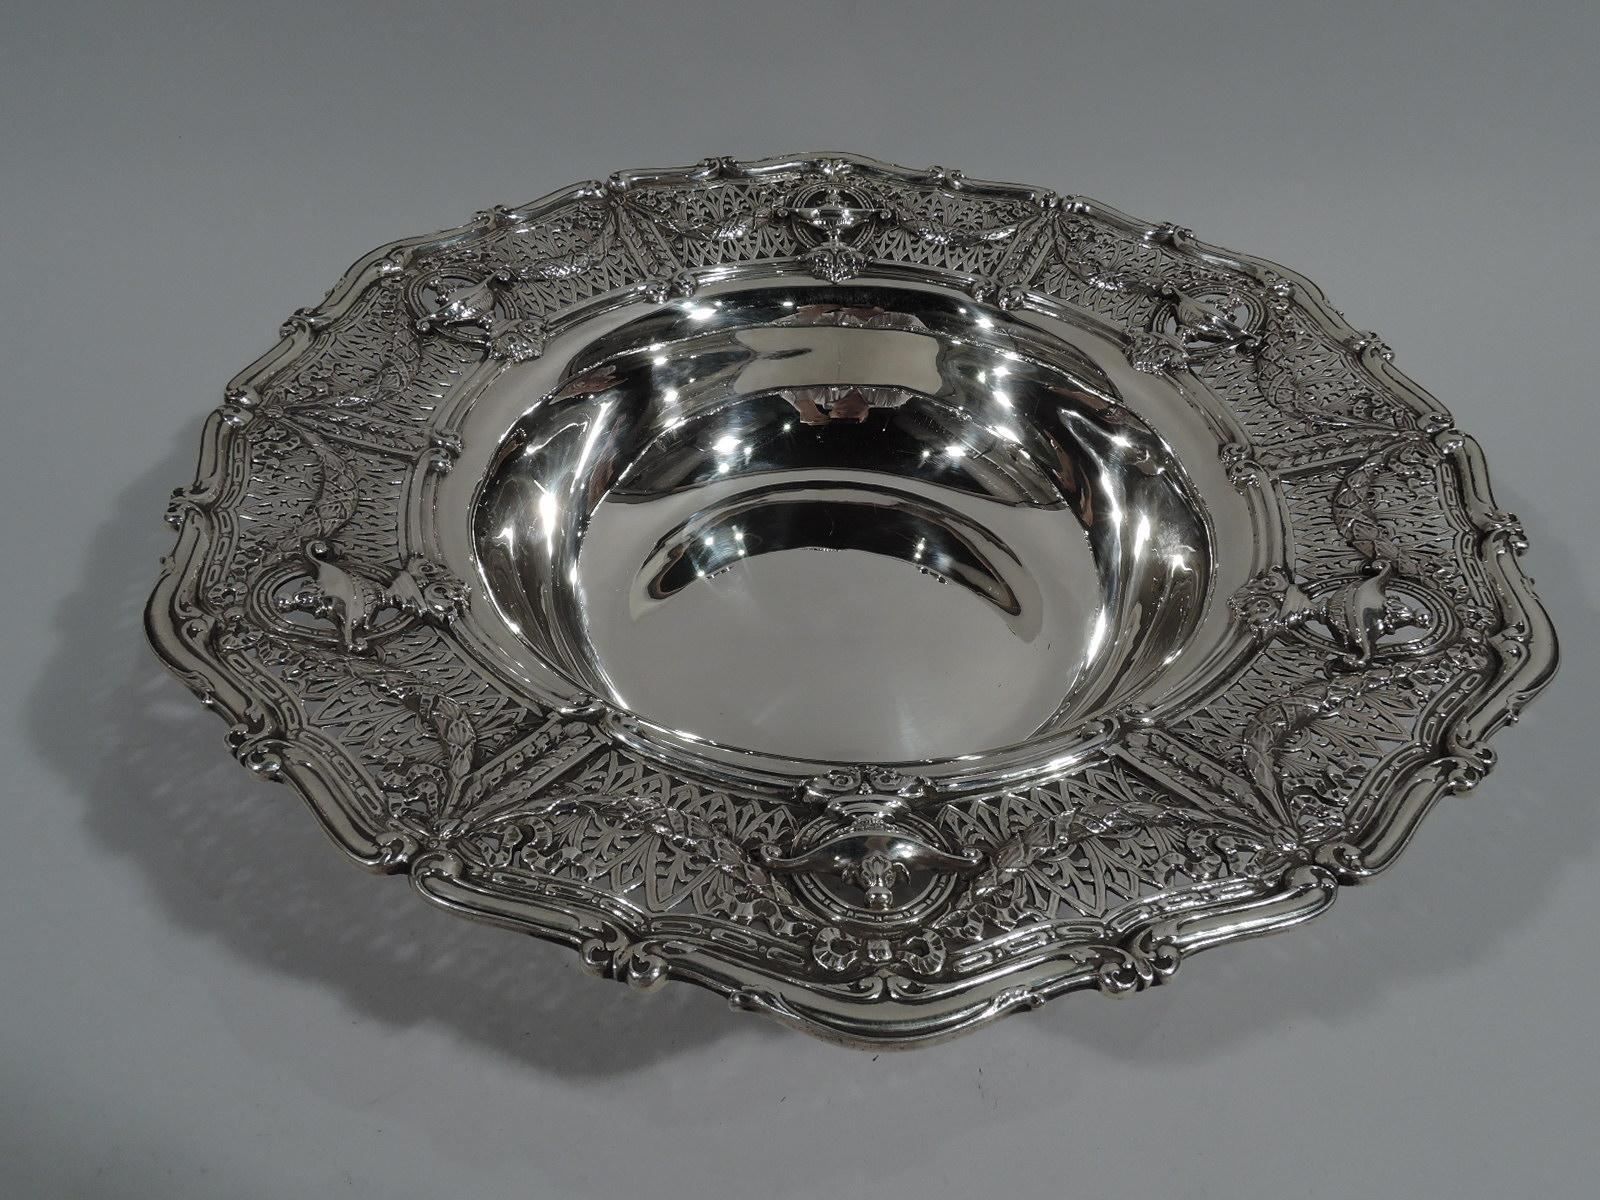 Edwardian Regency sterling silver centerpiece bowl in Adam pattern. Made by Shreve & Co. in San Francisco, circa 1915. Solid and tapering well. Wide shoulder with Classical vases on open rondels joined by leaf swag on pierced fern ground. Scrolled